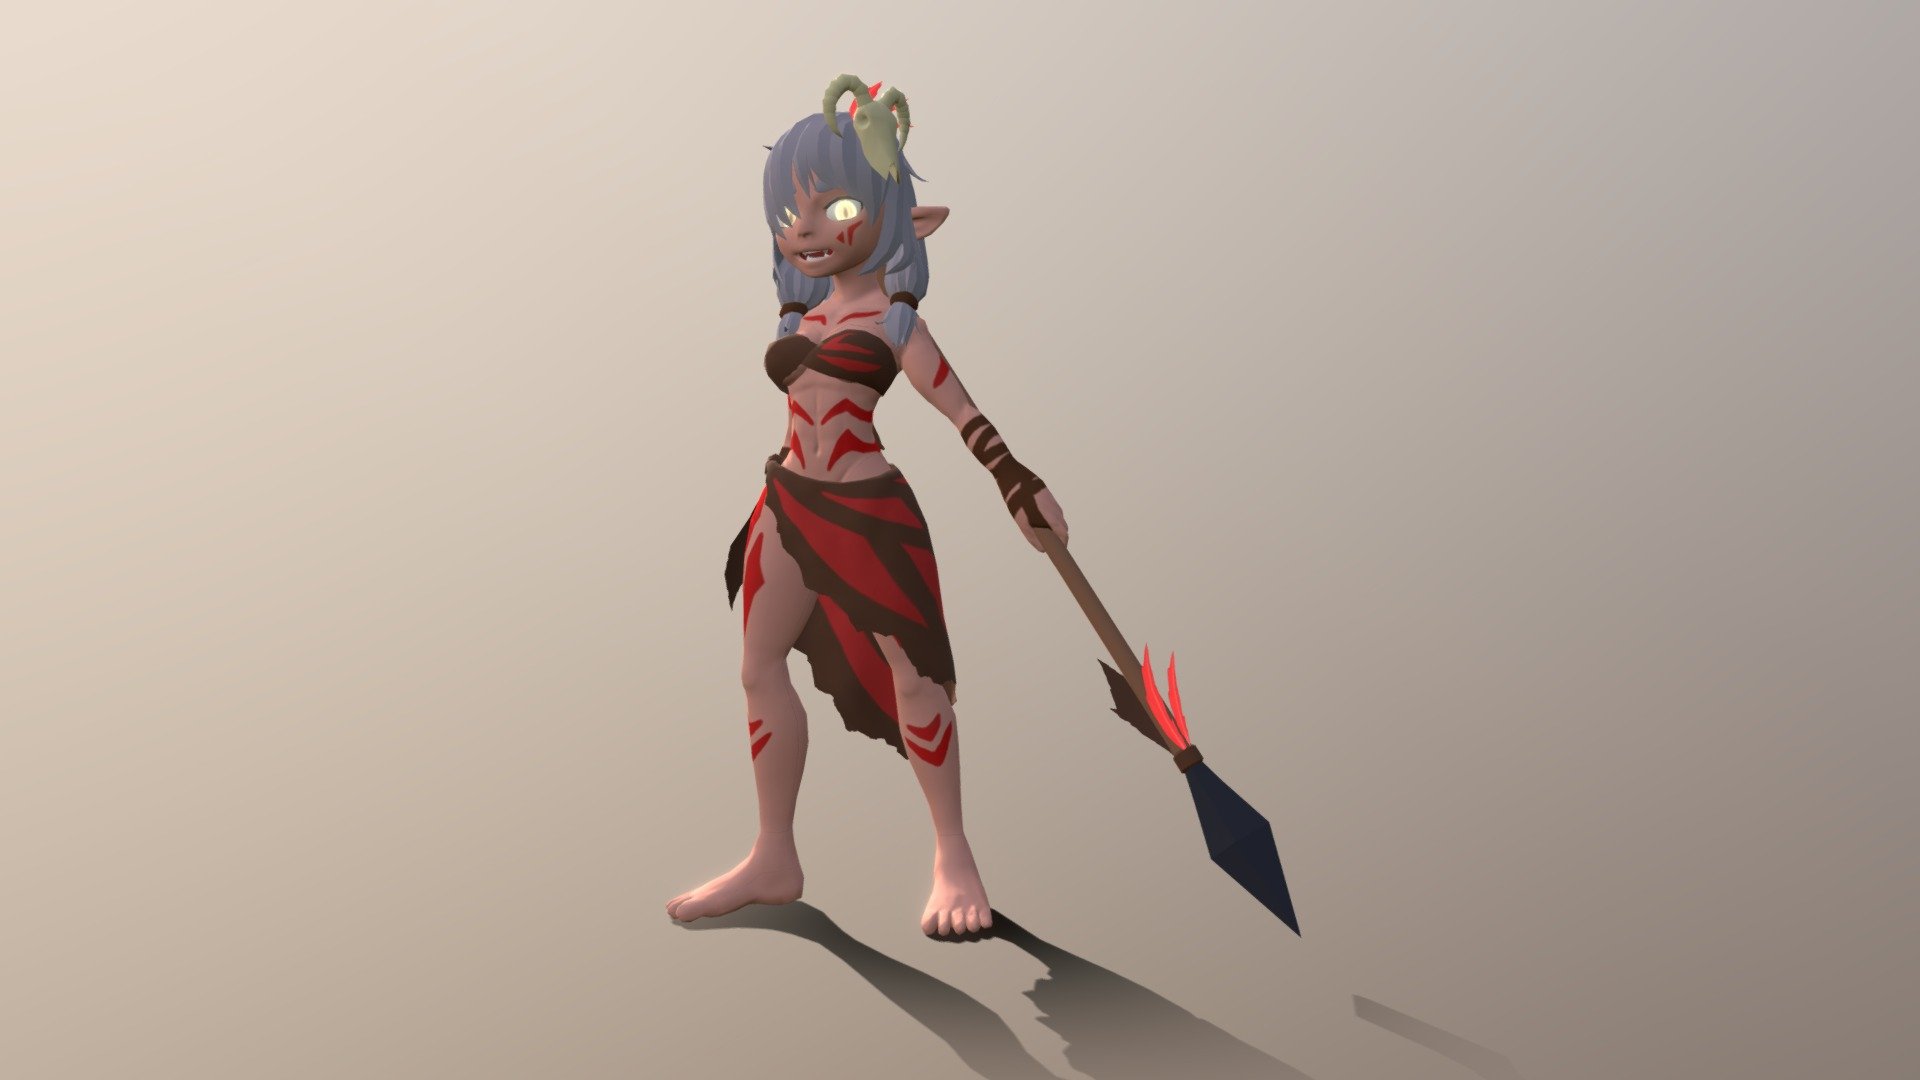 3D model of a character that could be used in a game 3d model